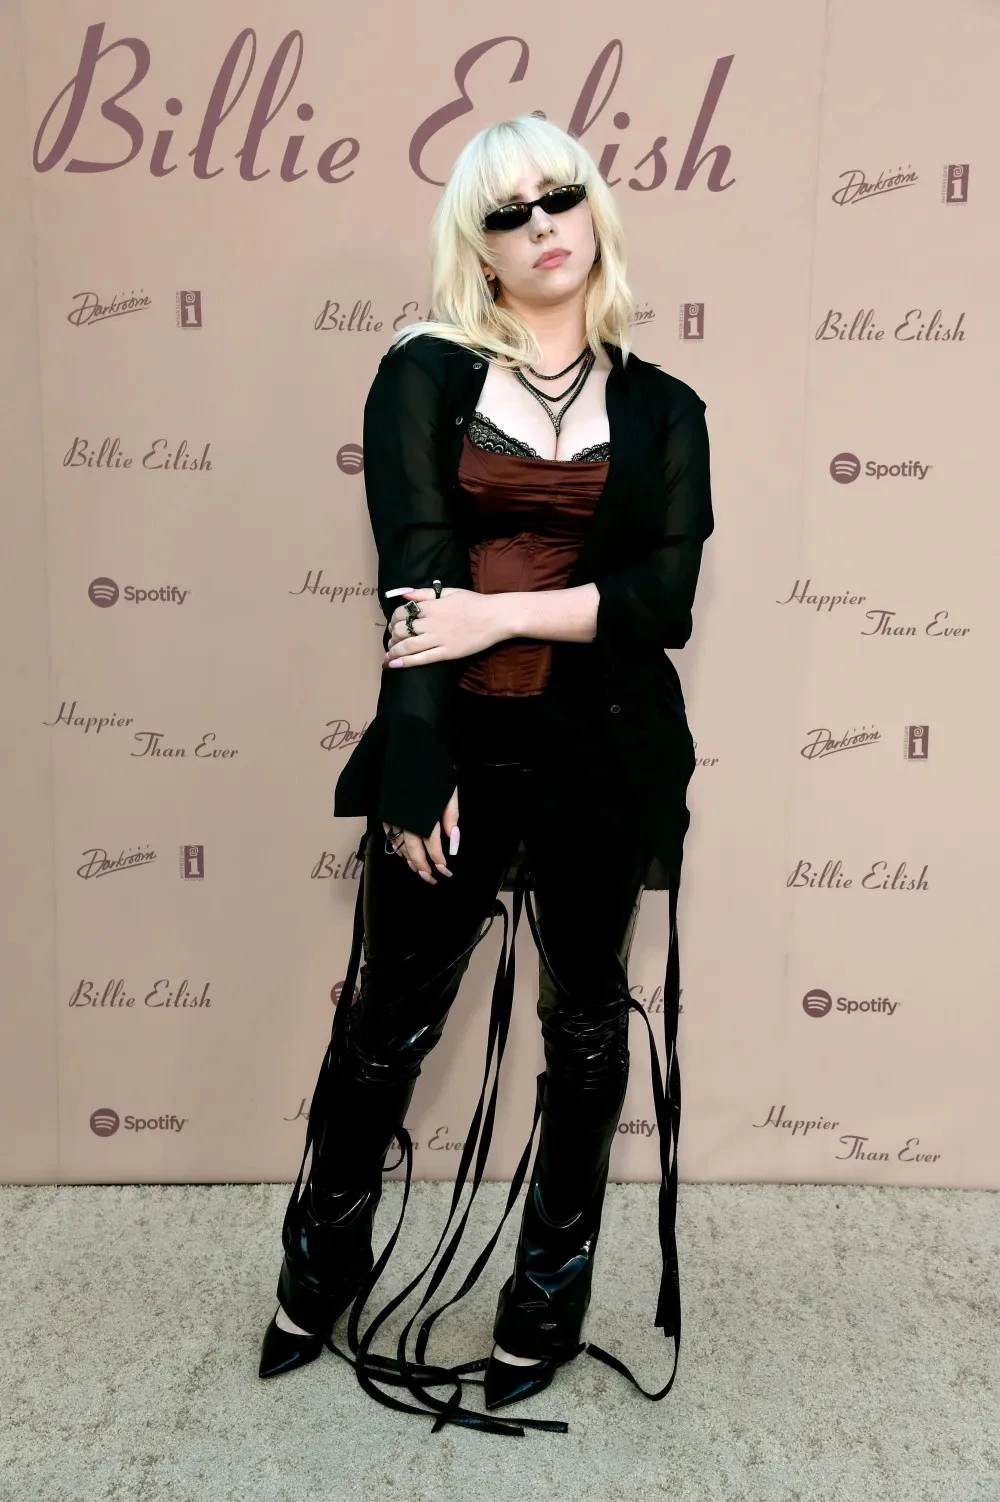 A Gothic Affair: Billie's Transformation at the "Happier Than Ever" Party